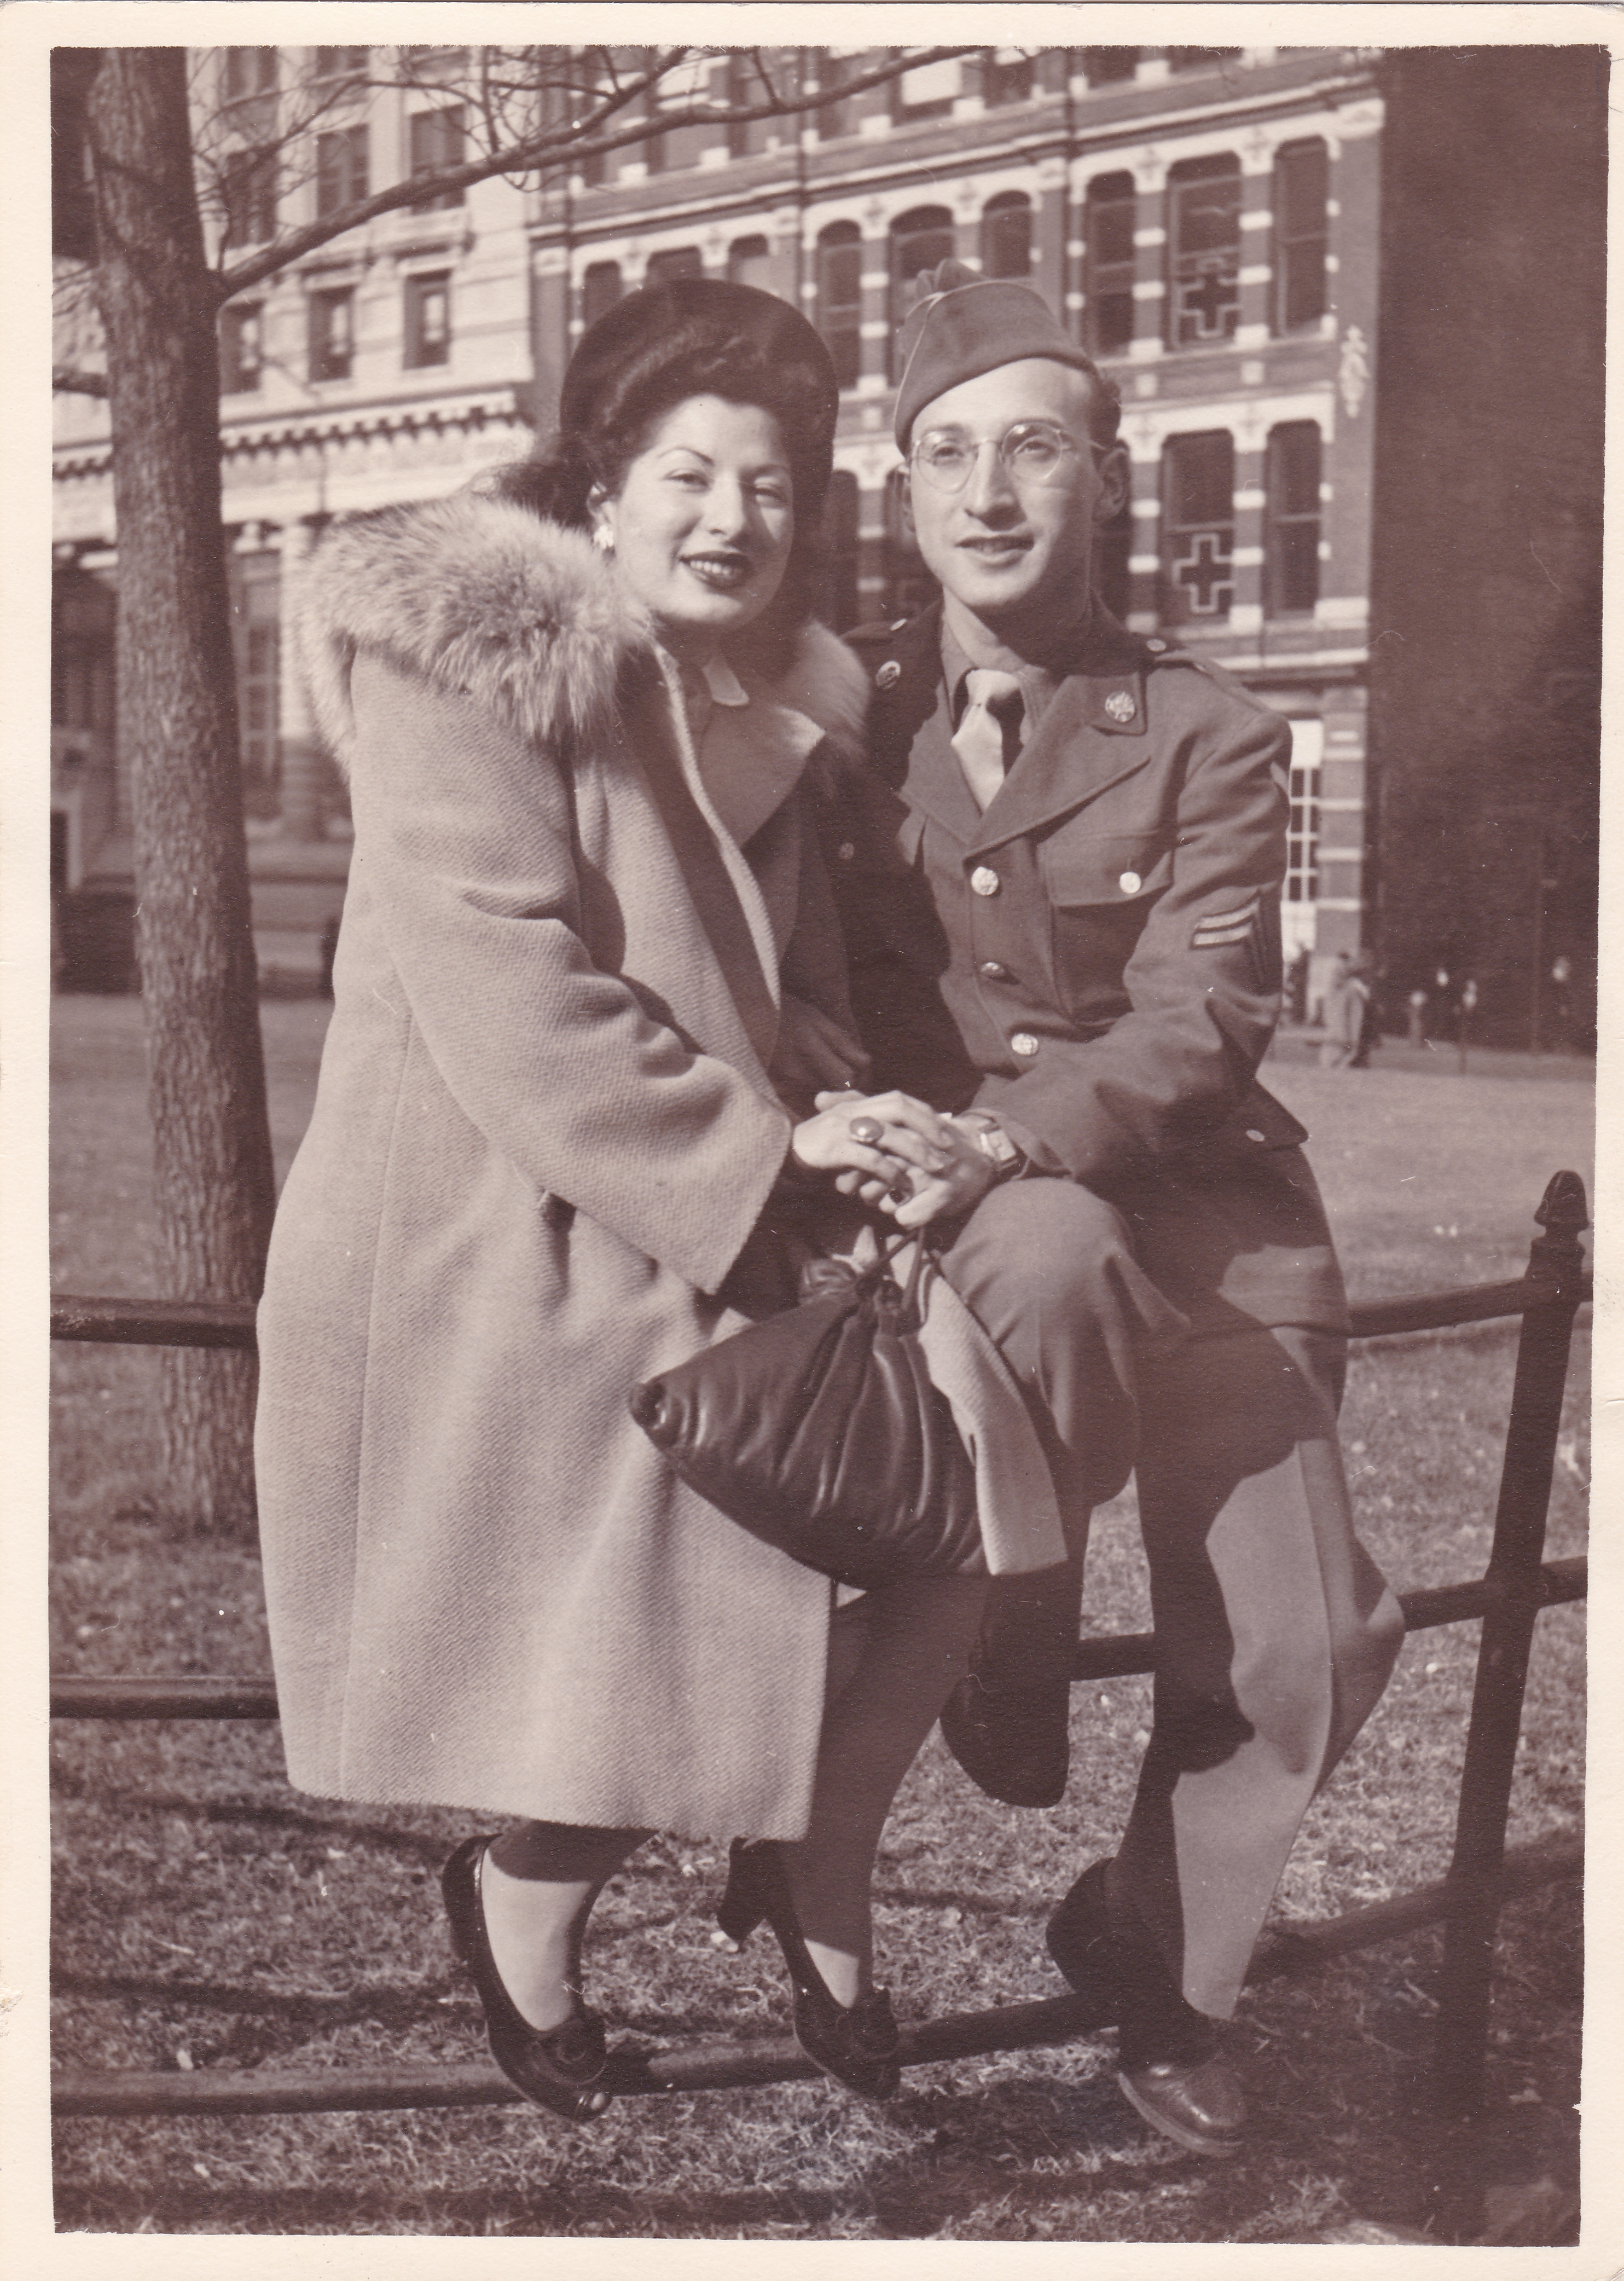 Wedding Photograph of Harry Weber and Edith Chizefsky